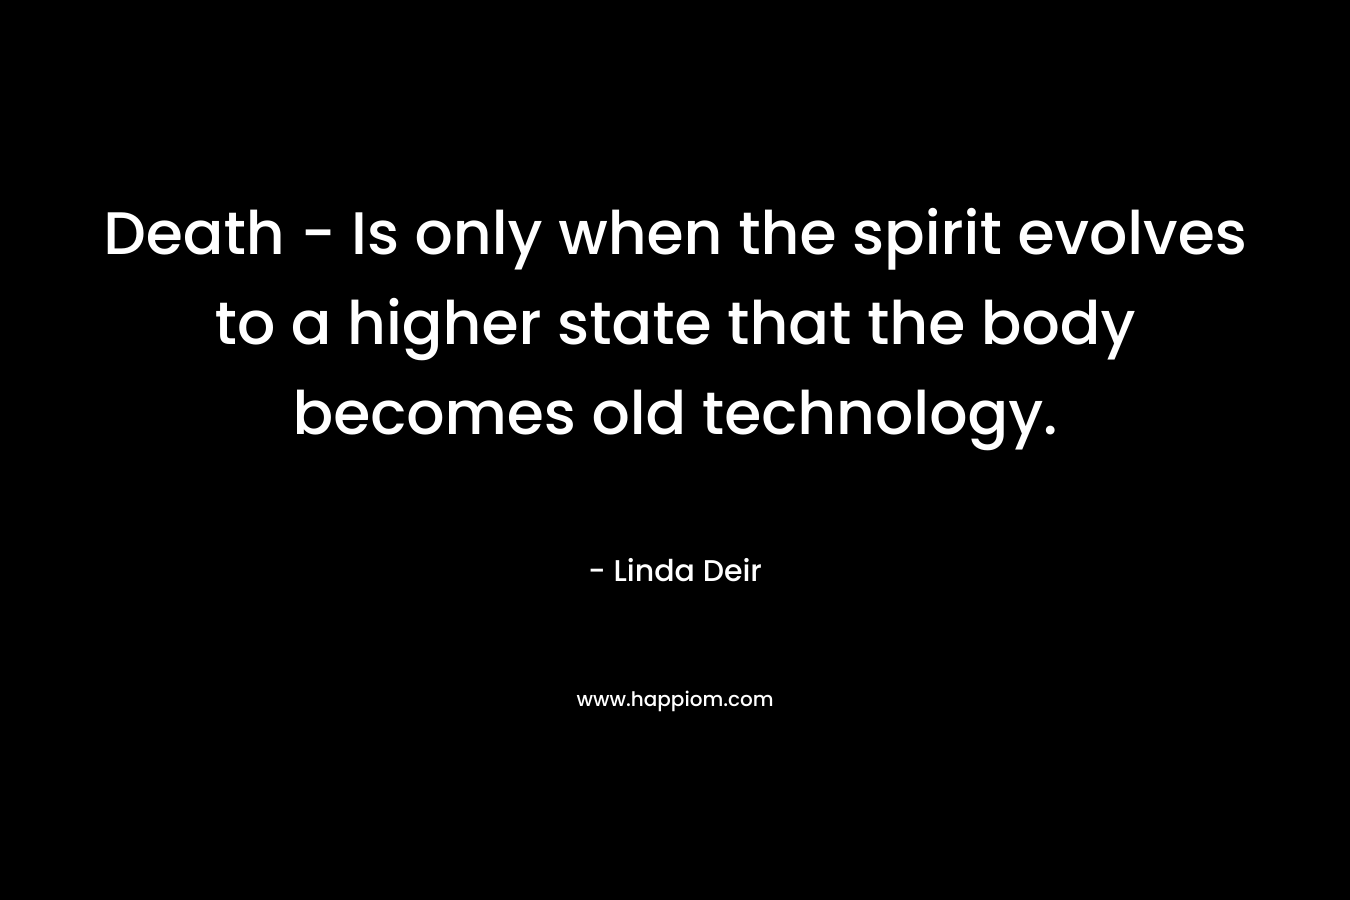 Death – Is only when the spirit evolves to a higher state that the body becomes old technology. – Linda Deir